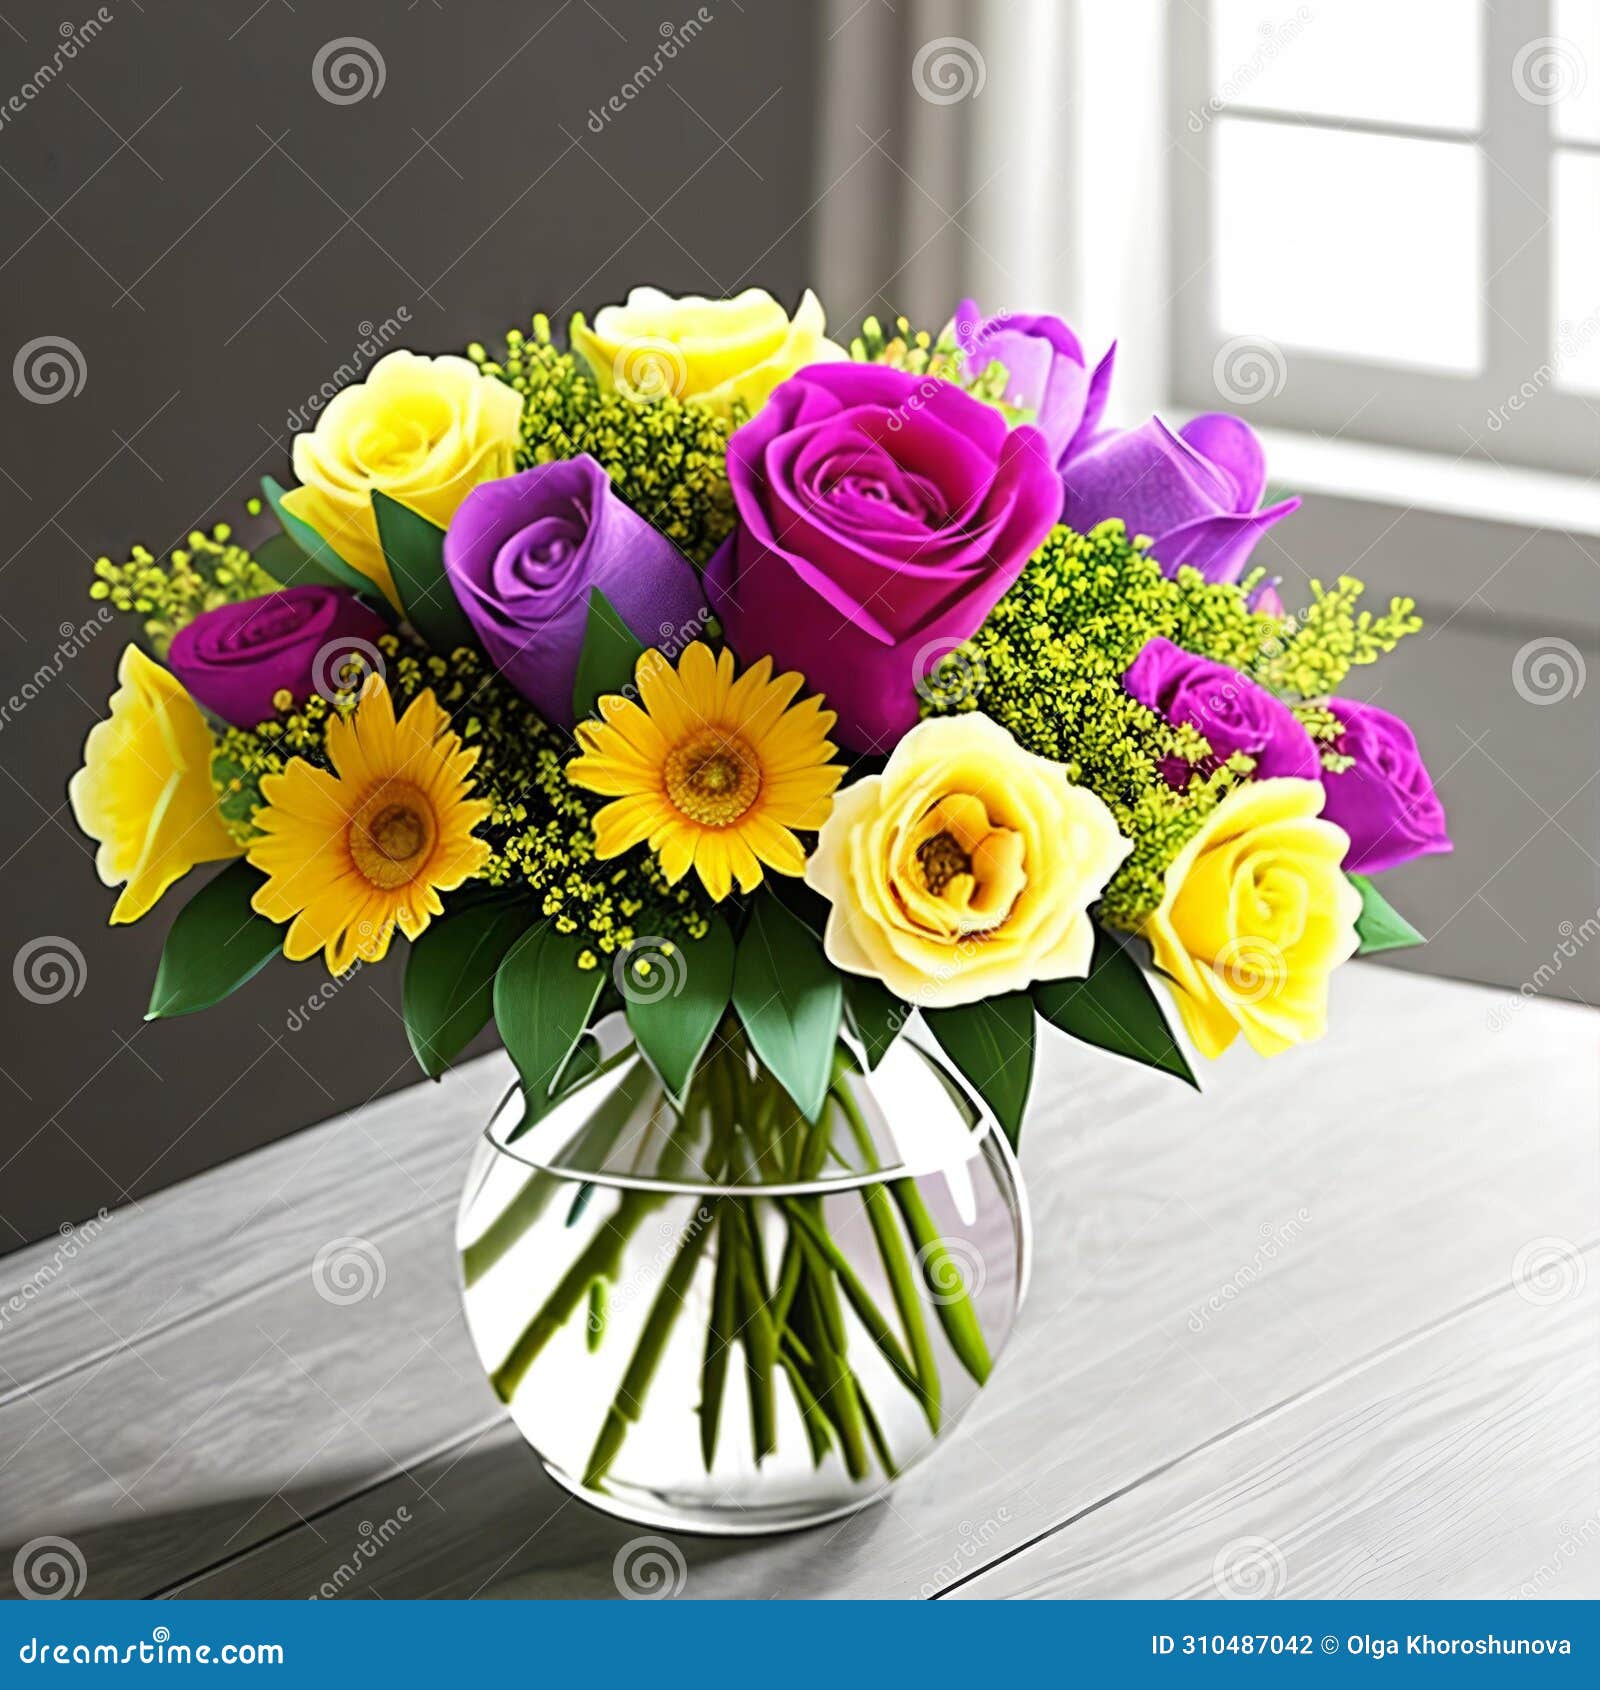 floral elegance. a vibrant bouquet of spring flowers arranged in a stylish vase